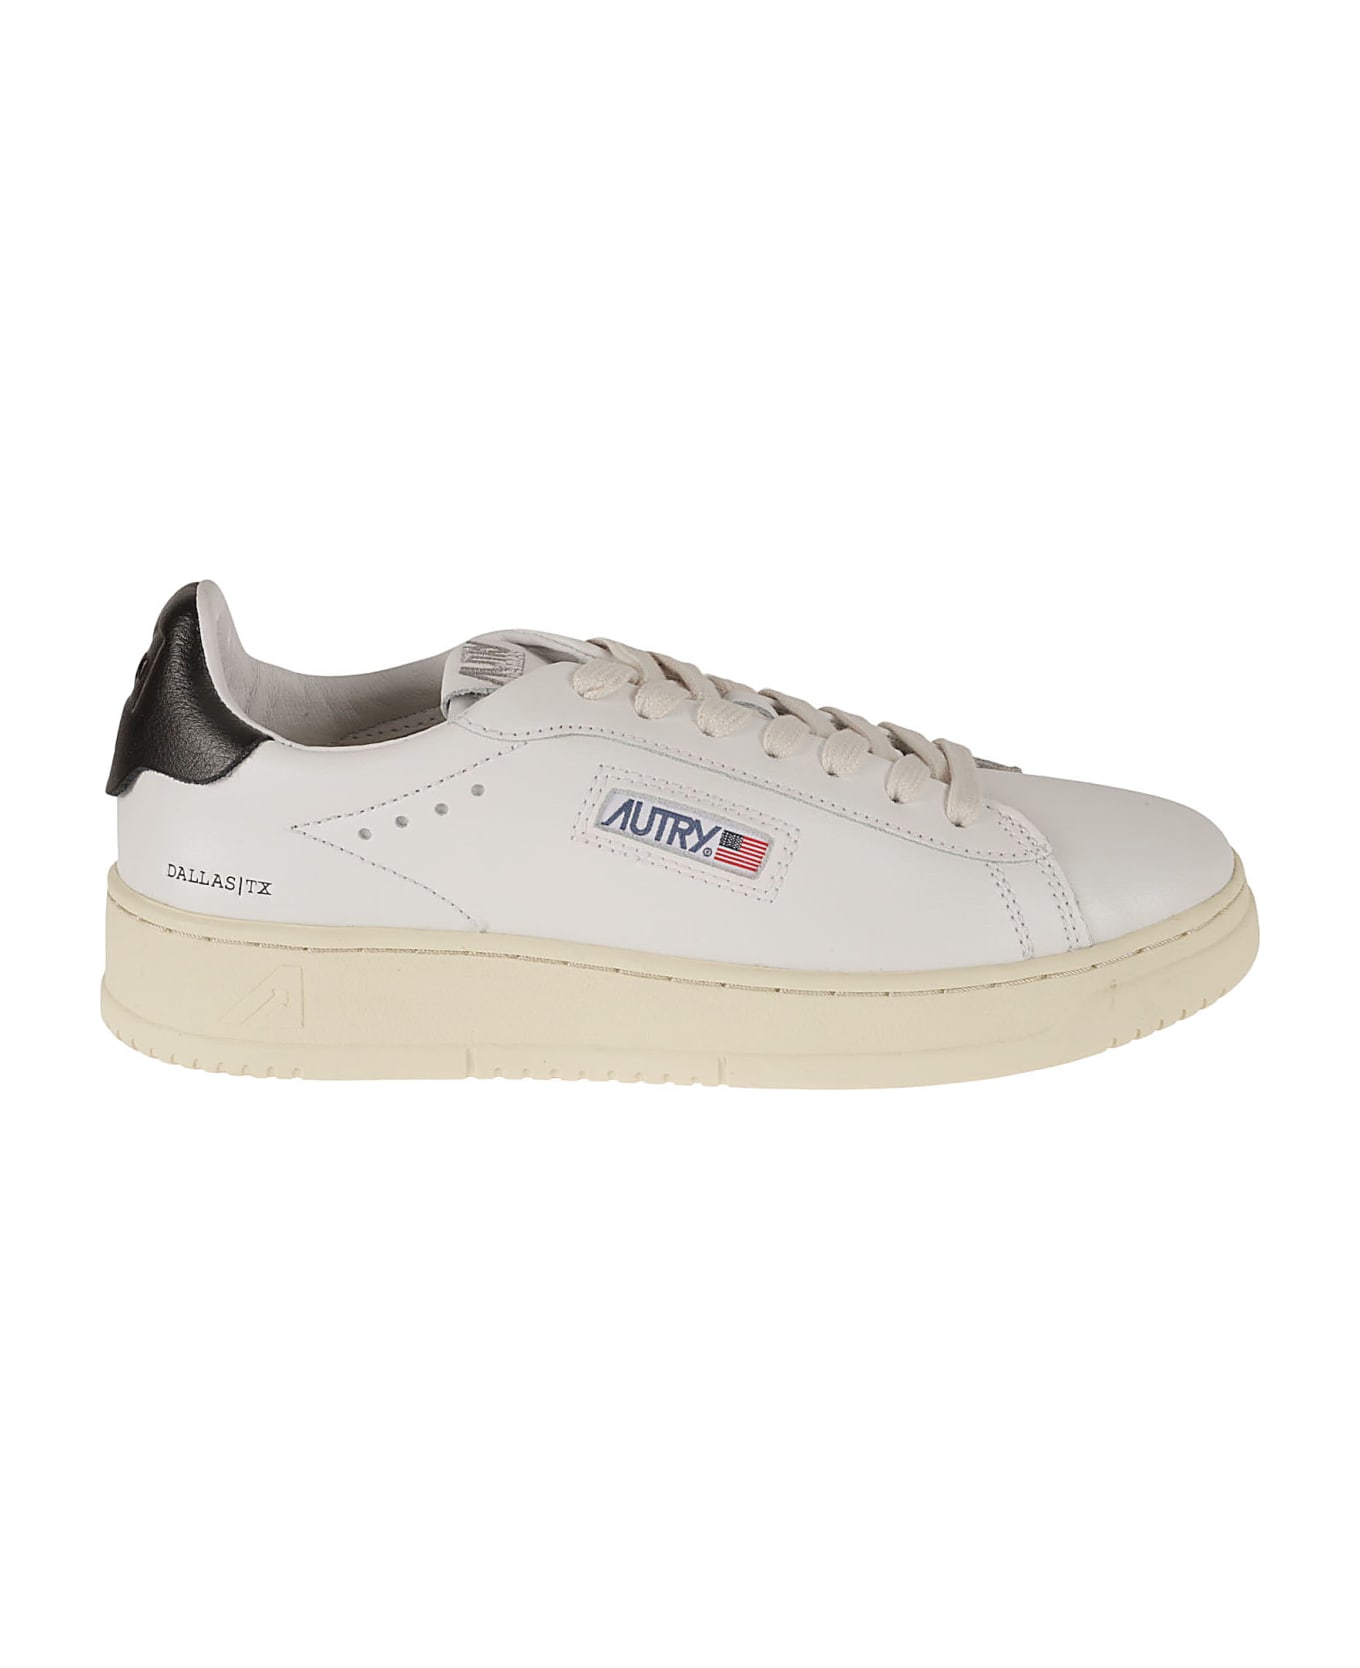 Autry Low Man Sneakers - white